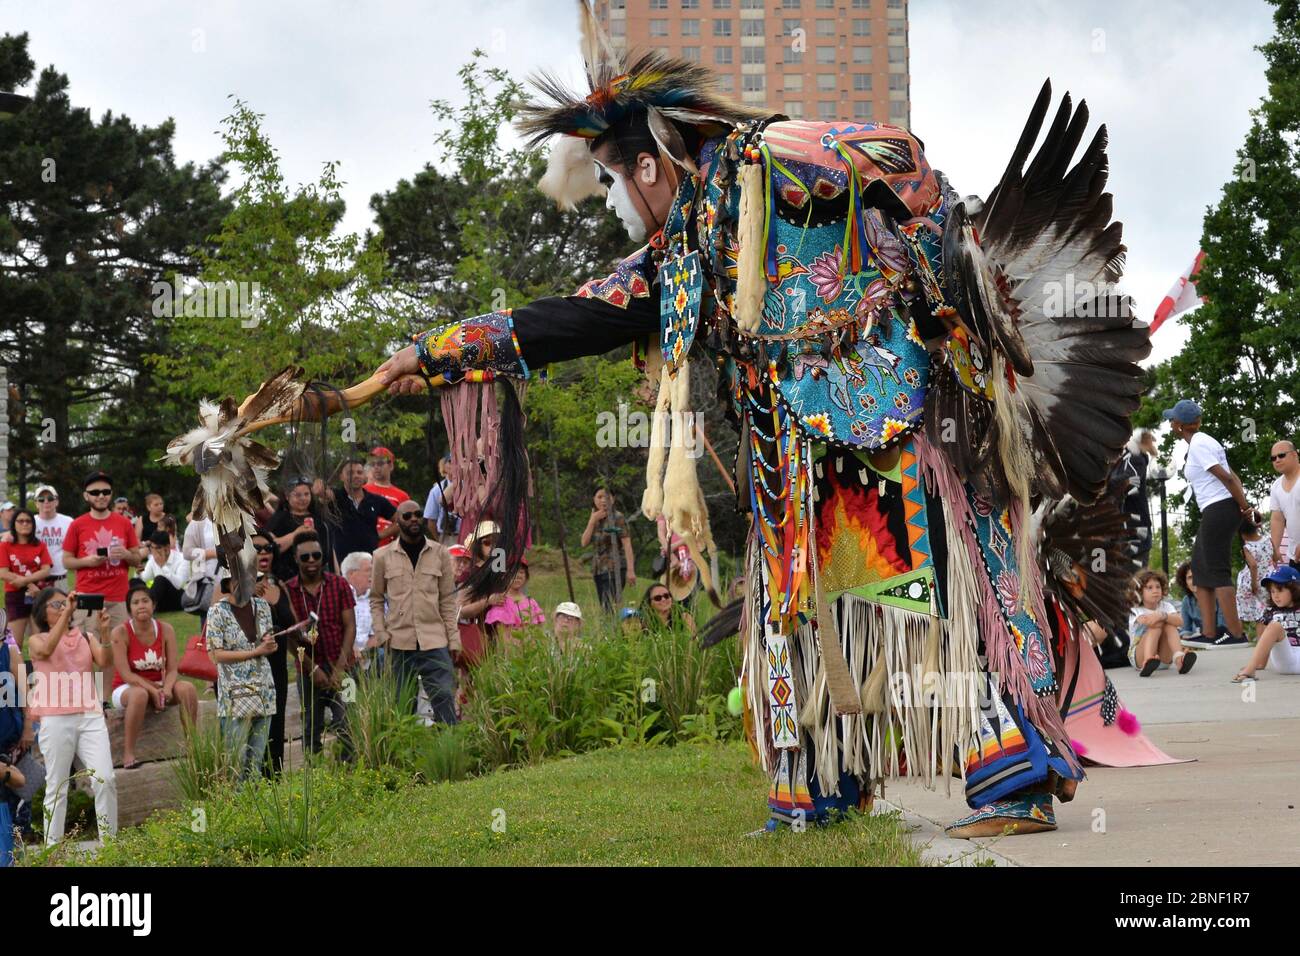 Toronto, Ontario / Canada - July 01, 2017: Indigenous native People in traditional Native Canadian clothing performing the traditional dance in the Ca Stock Photo